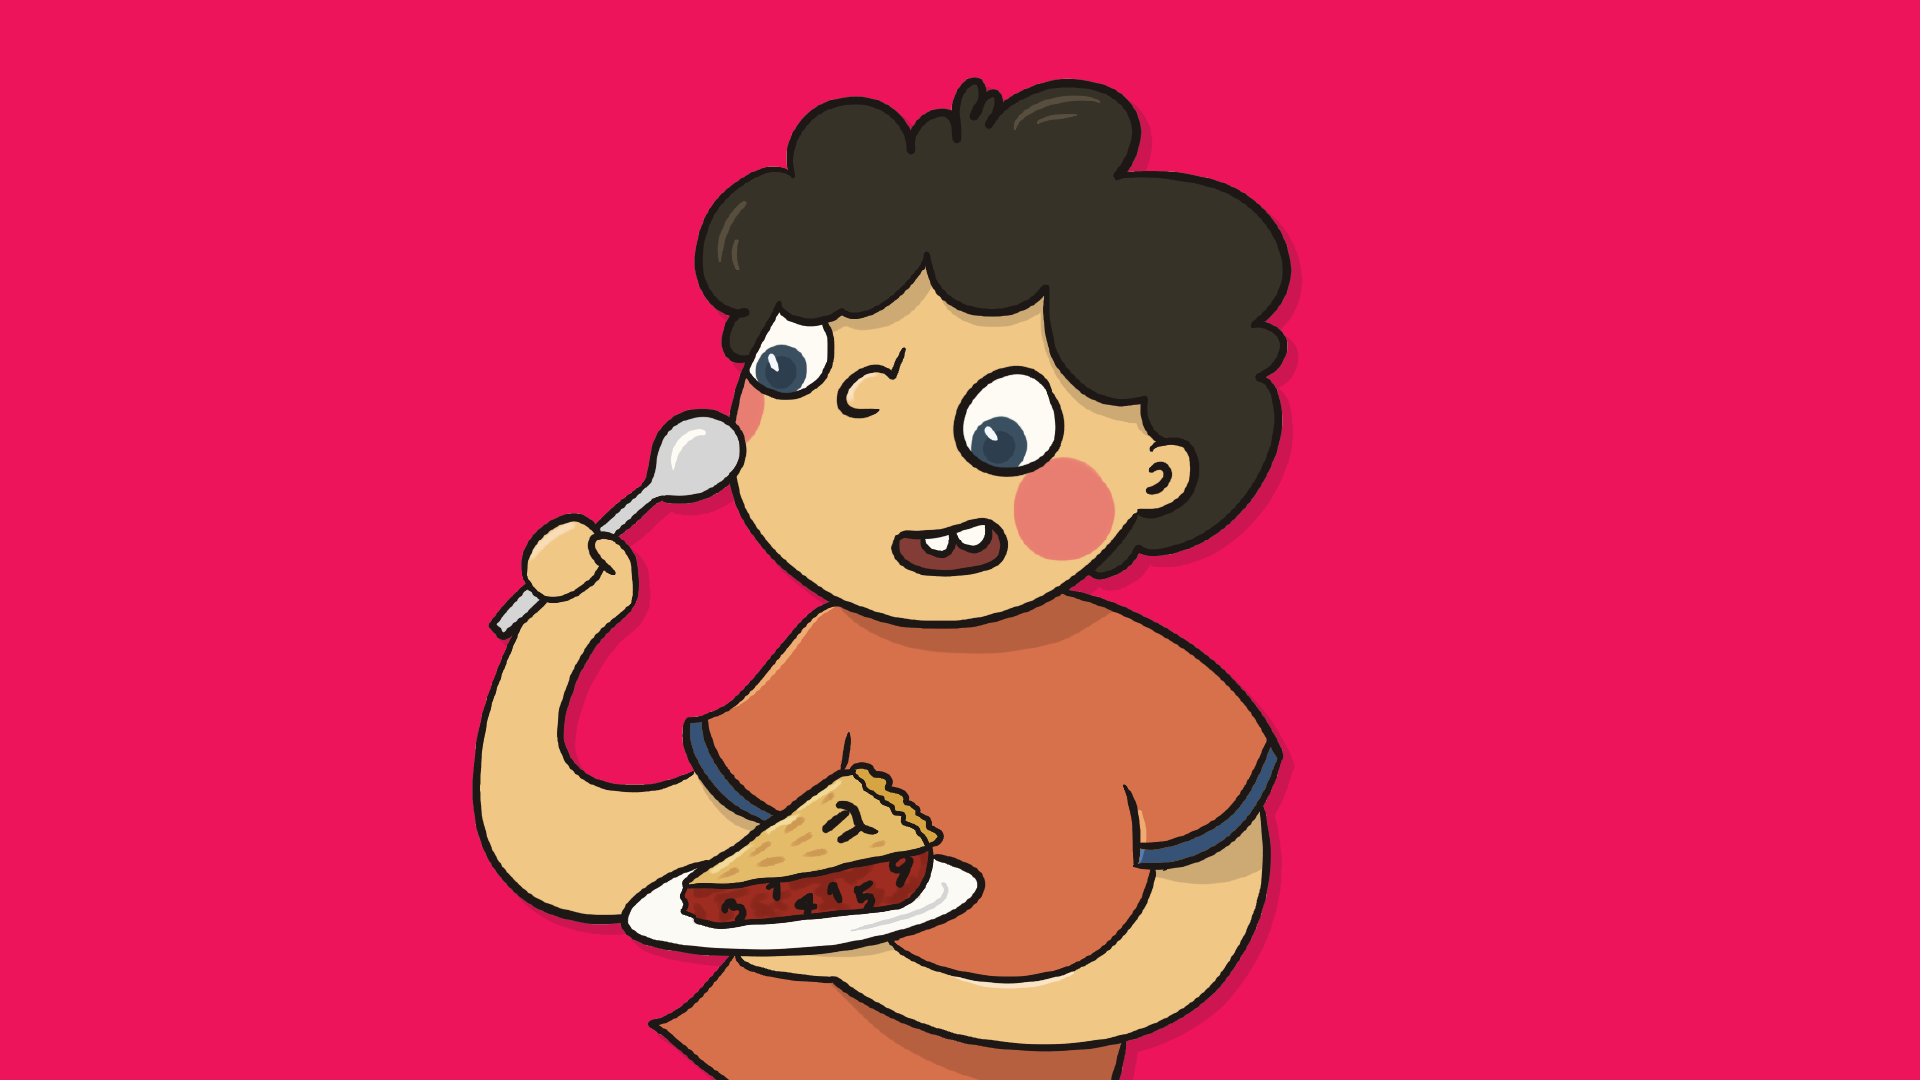 Drawing of a character eating a slice of pie with numbers in it.